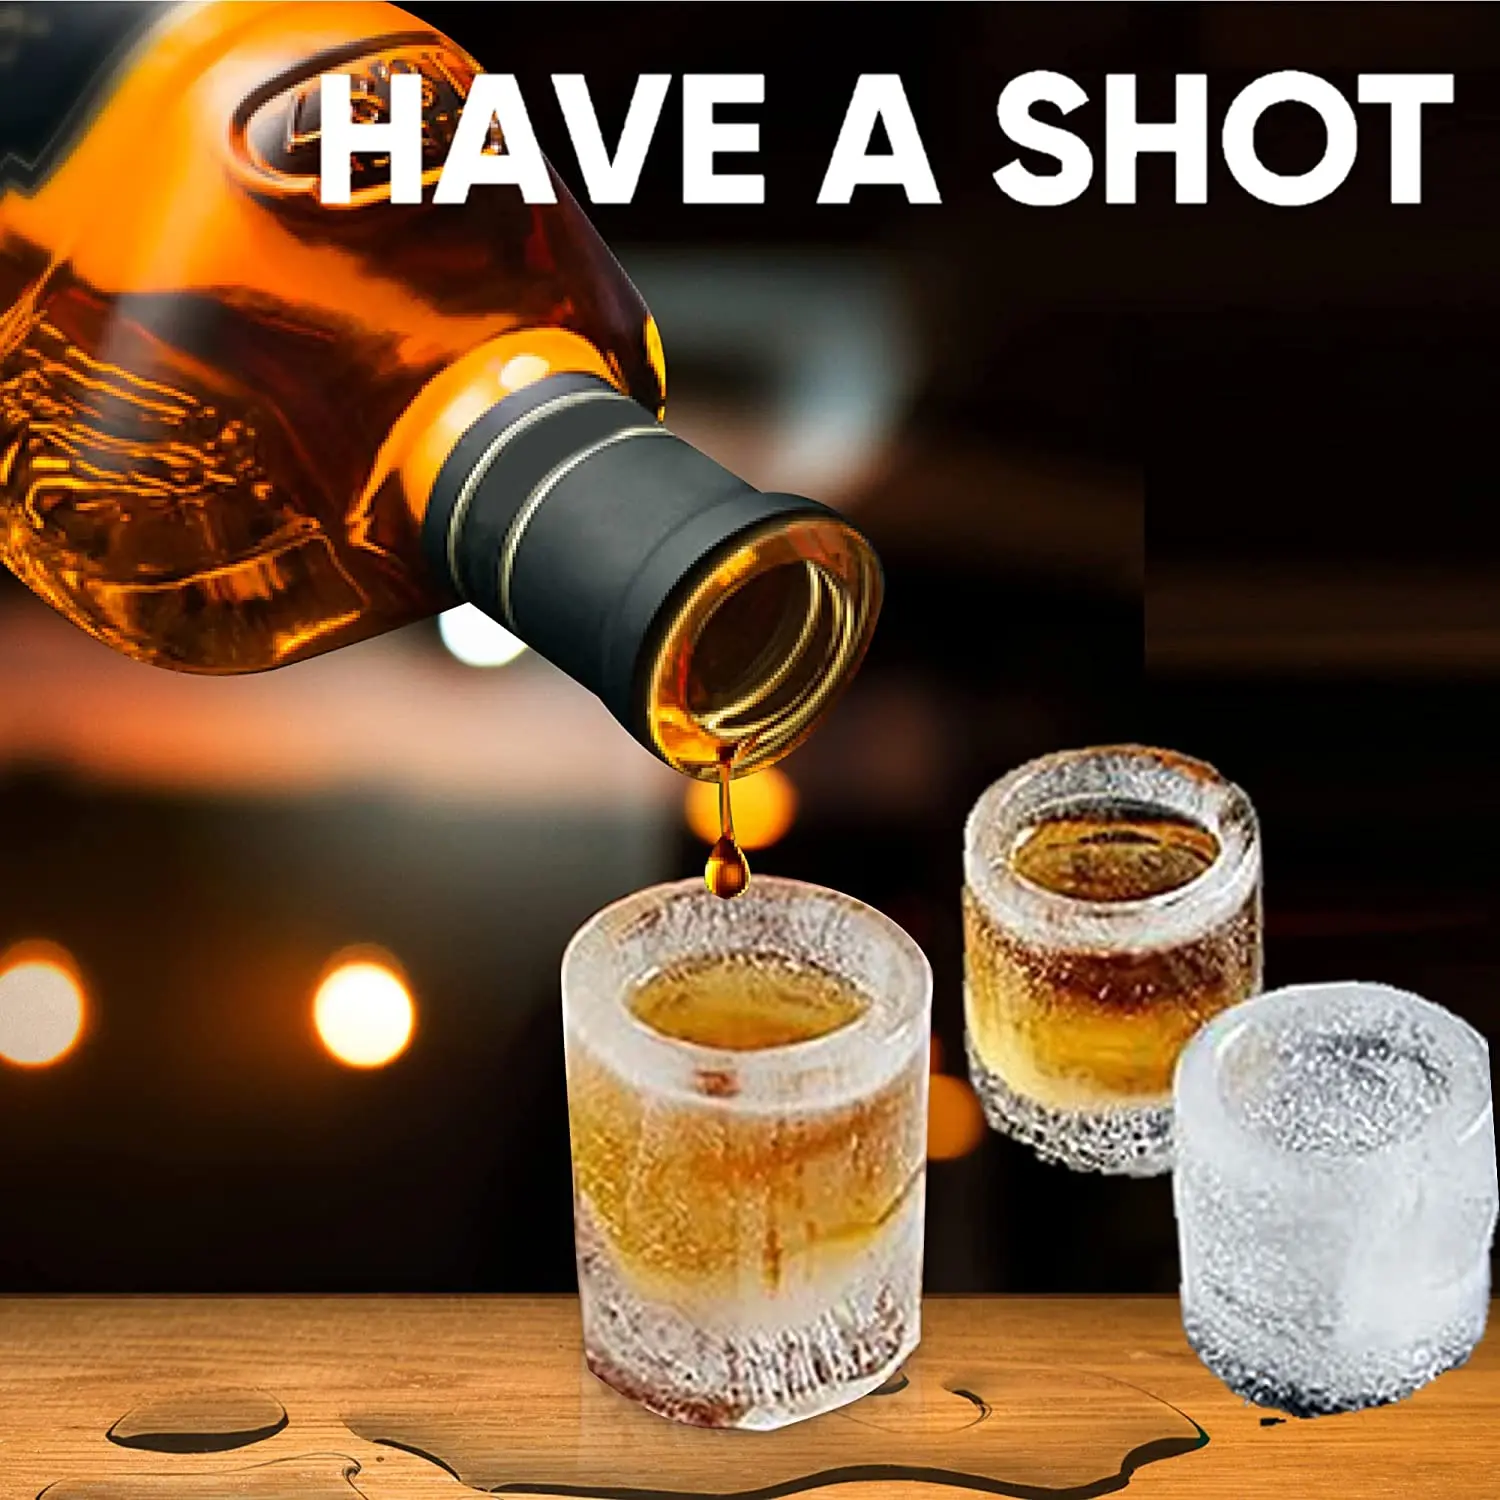 Creative 4 Grids Ice Cube Tray Mold Cup Mould Makes Shot Glass Ice Mould Novelty Gifts Ice Tray Summer Drinking Kitchen Tool